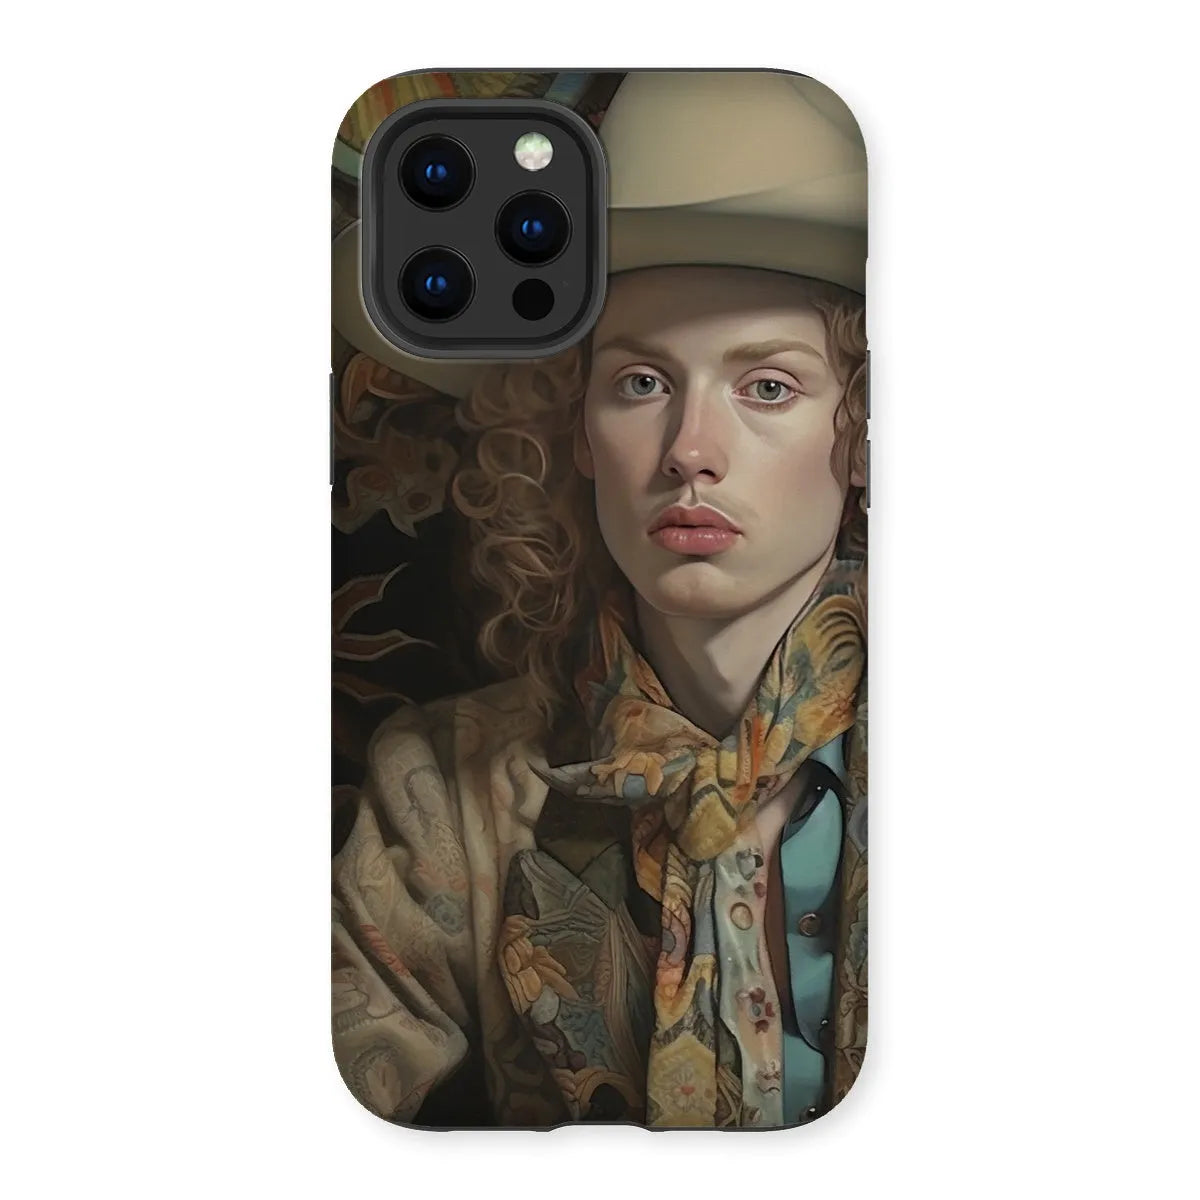 Ollie The Transgender Cowboy - F2m Dandy Outlaw Phone Case - Iphone 13 Pro Max / Matte - Mobile Phone Cases - Aesthetic